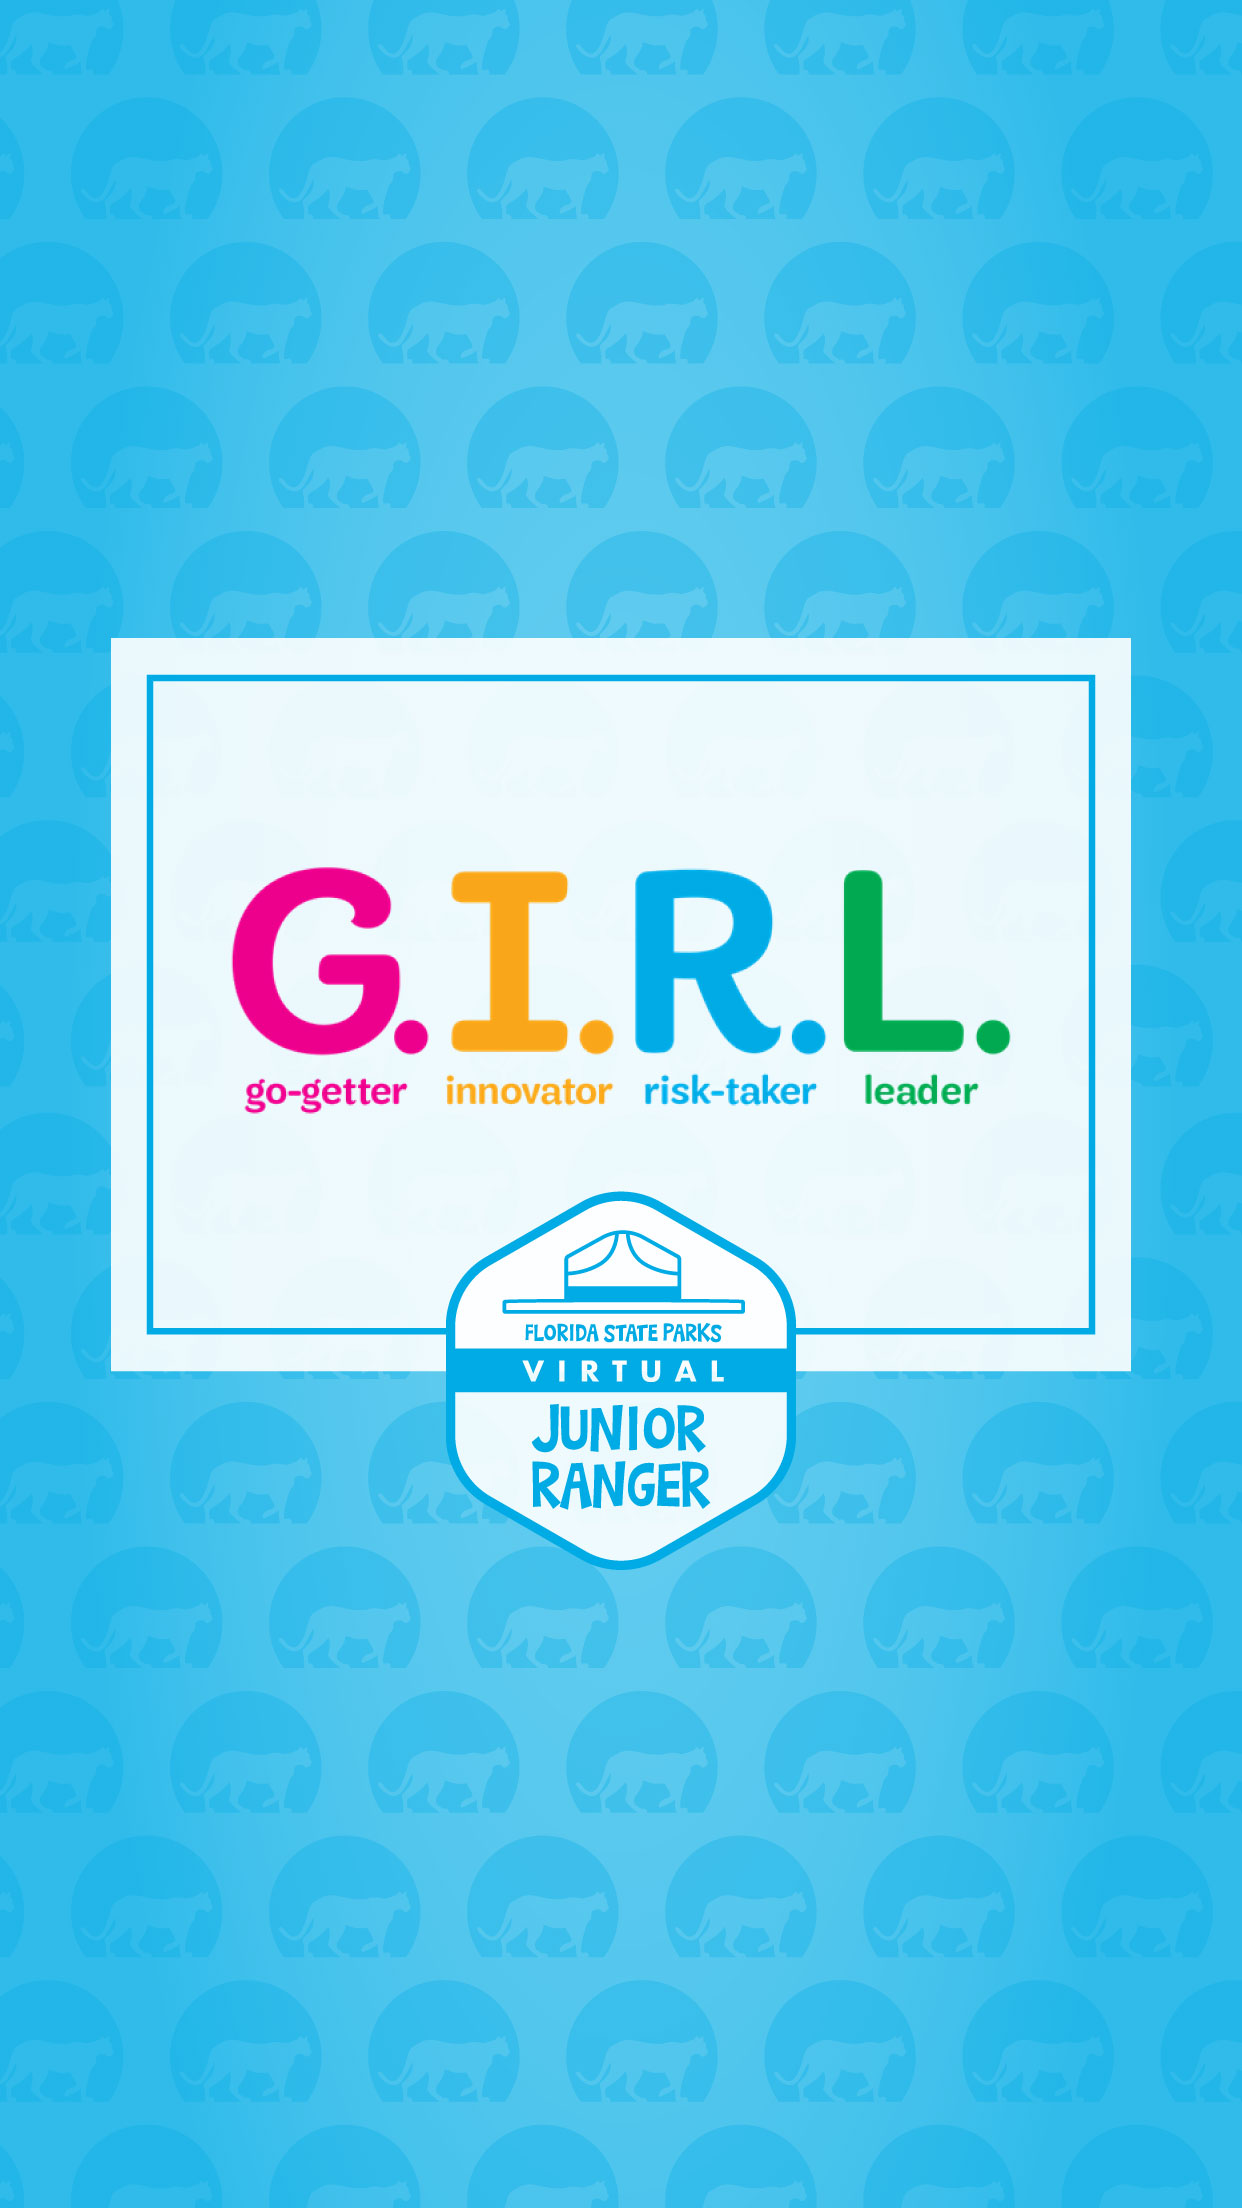 Virtual Junior Ranger Badge and GIRL on Blue Background formatted for Mobile